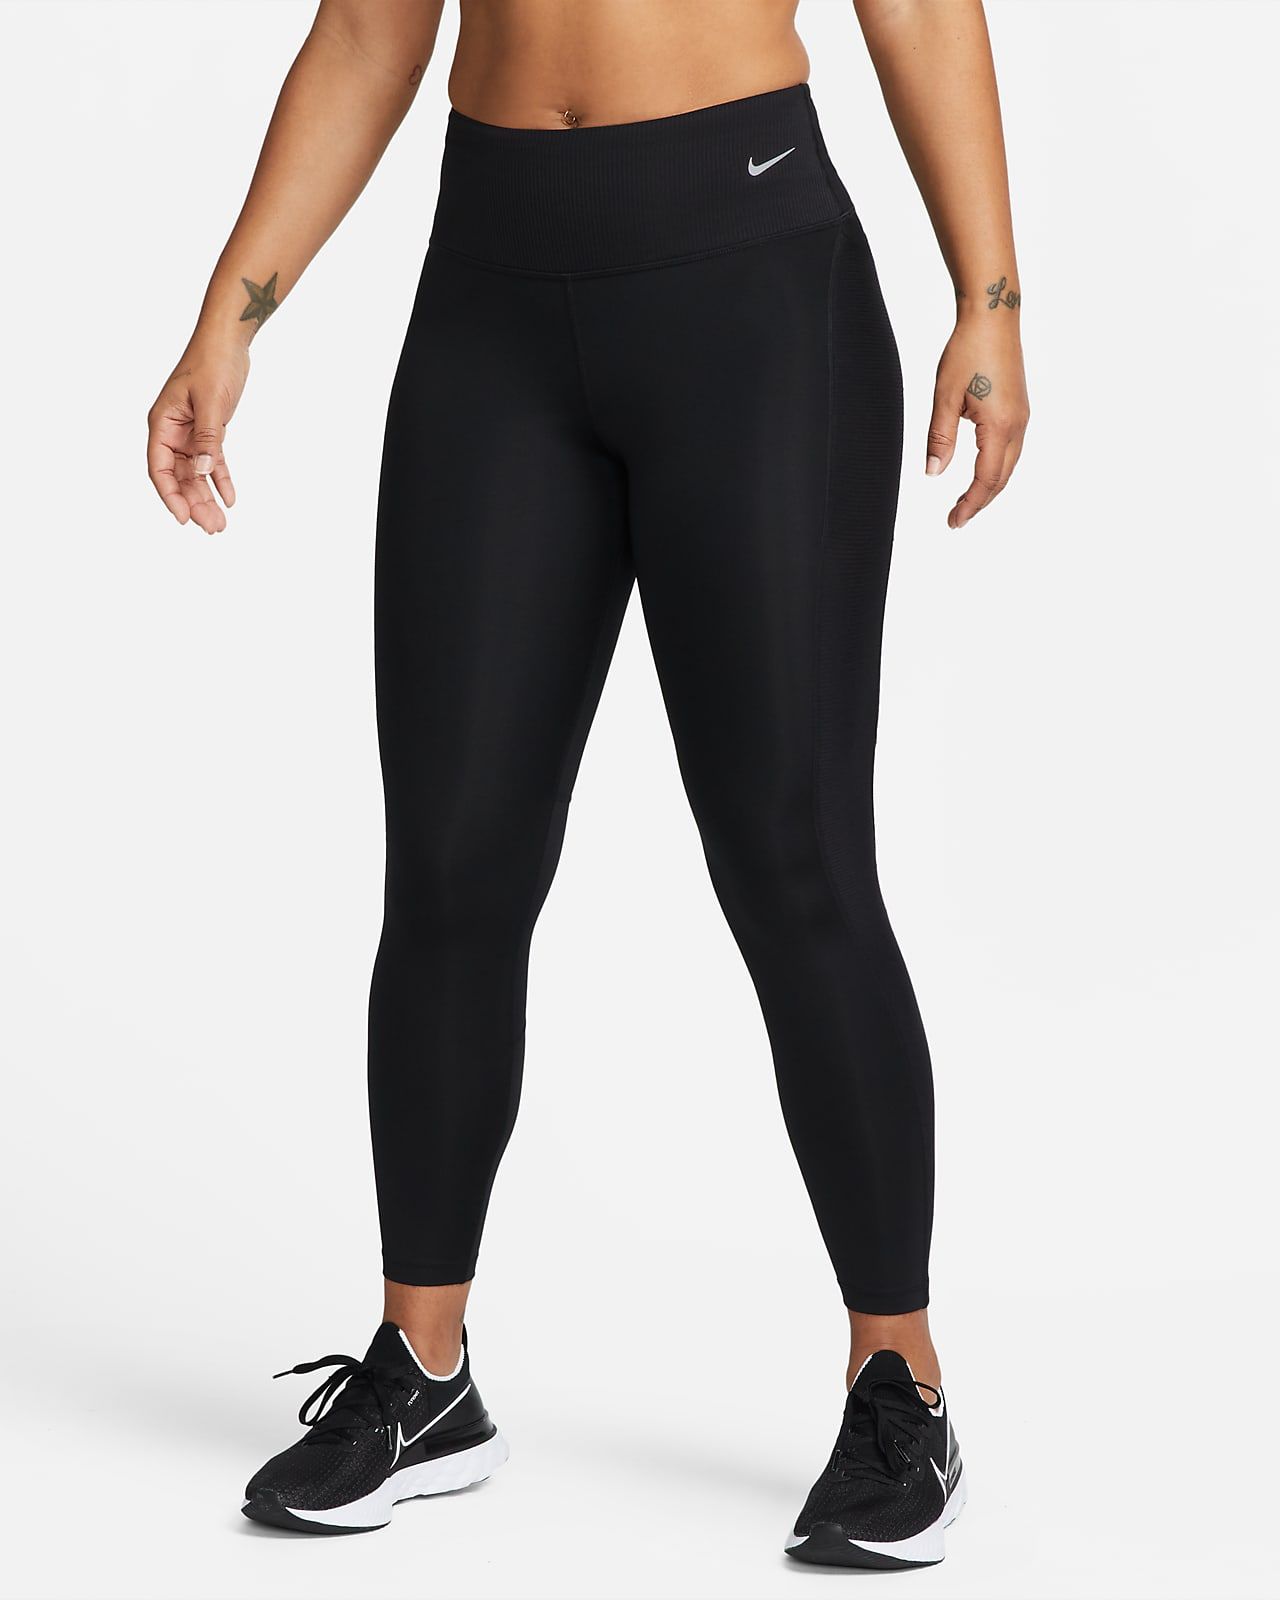 Women's Mid-Rise 7/8 Running Leggings with Pockets | Nike (US)